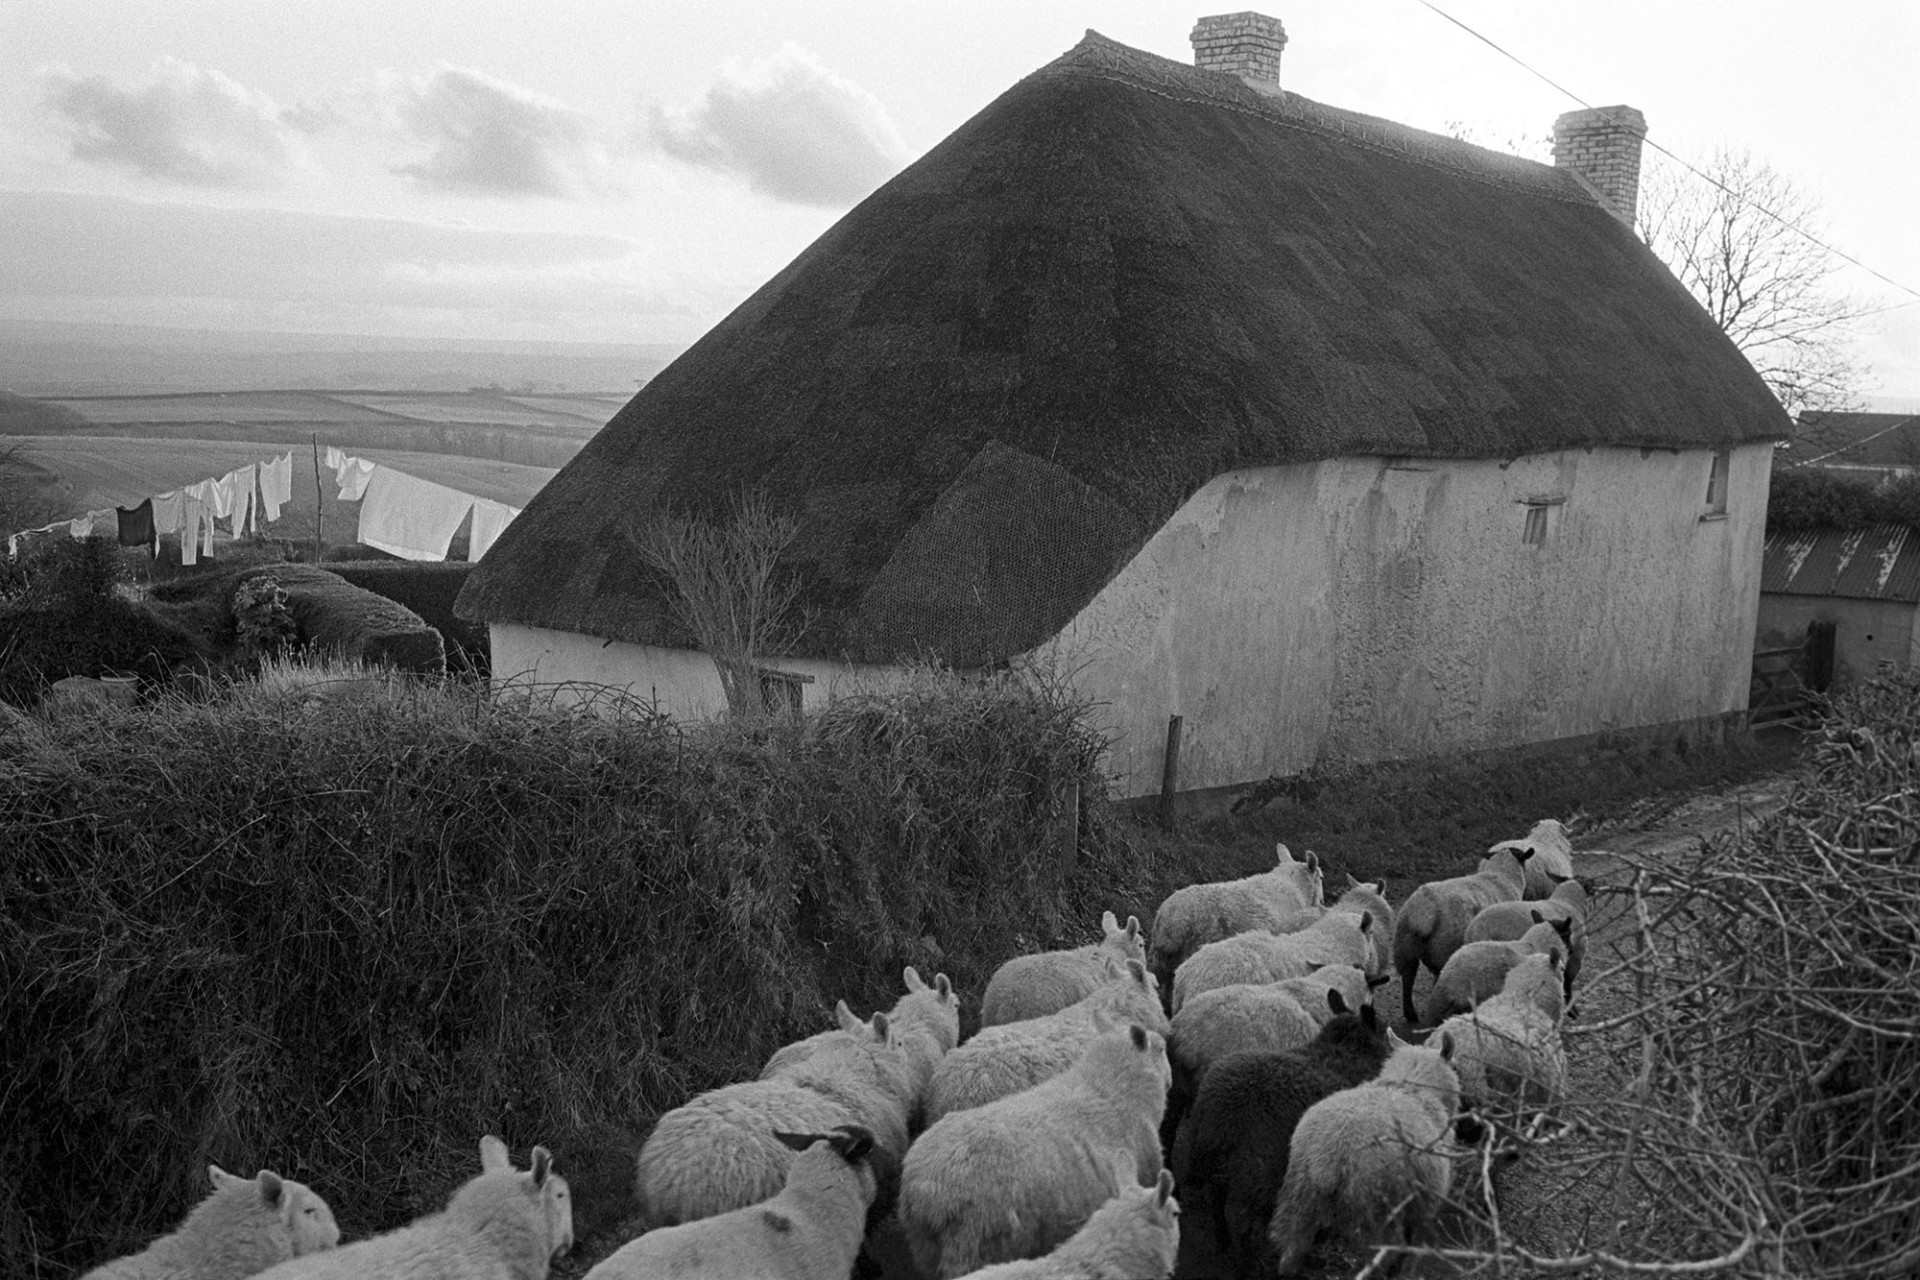 Flock of sheep passing cob and thatch cottage, washing on line in background. 
[A flock of sheep walking along a lane past a cob and thatched cottage in Upcott, Dolton. A washing line with washing out to dry can be seen in the garden behind the cottage.]